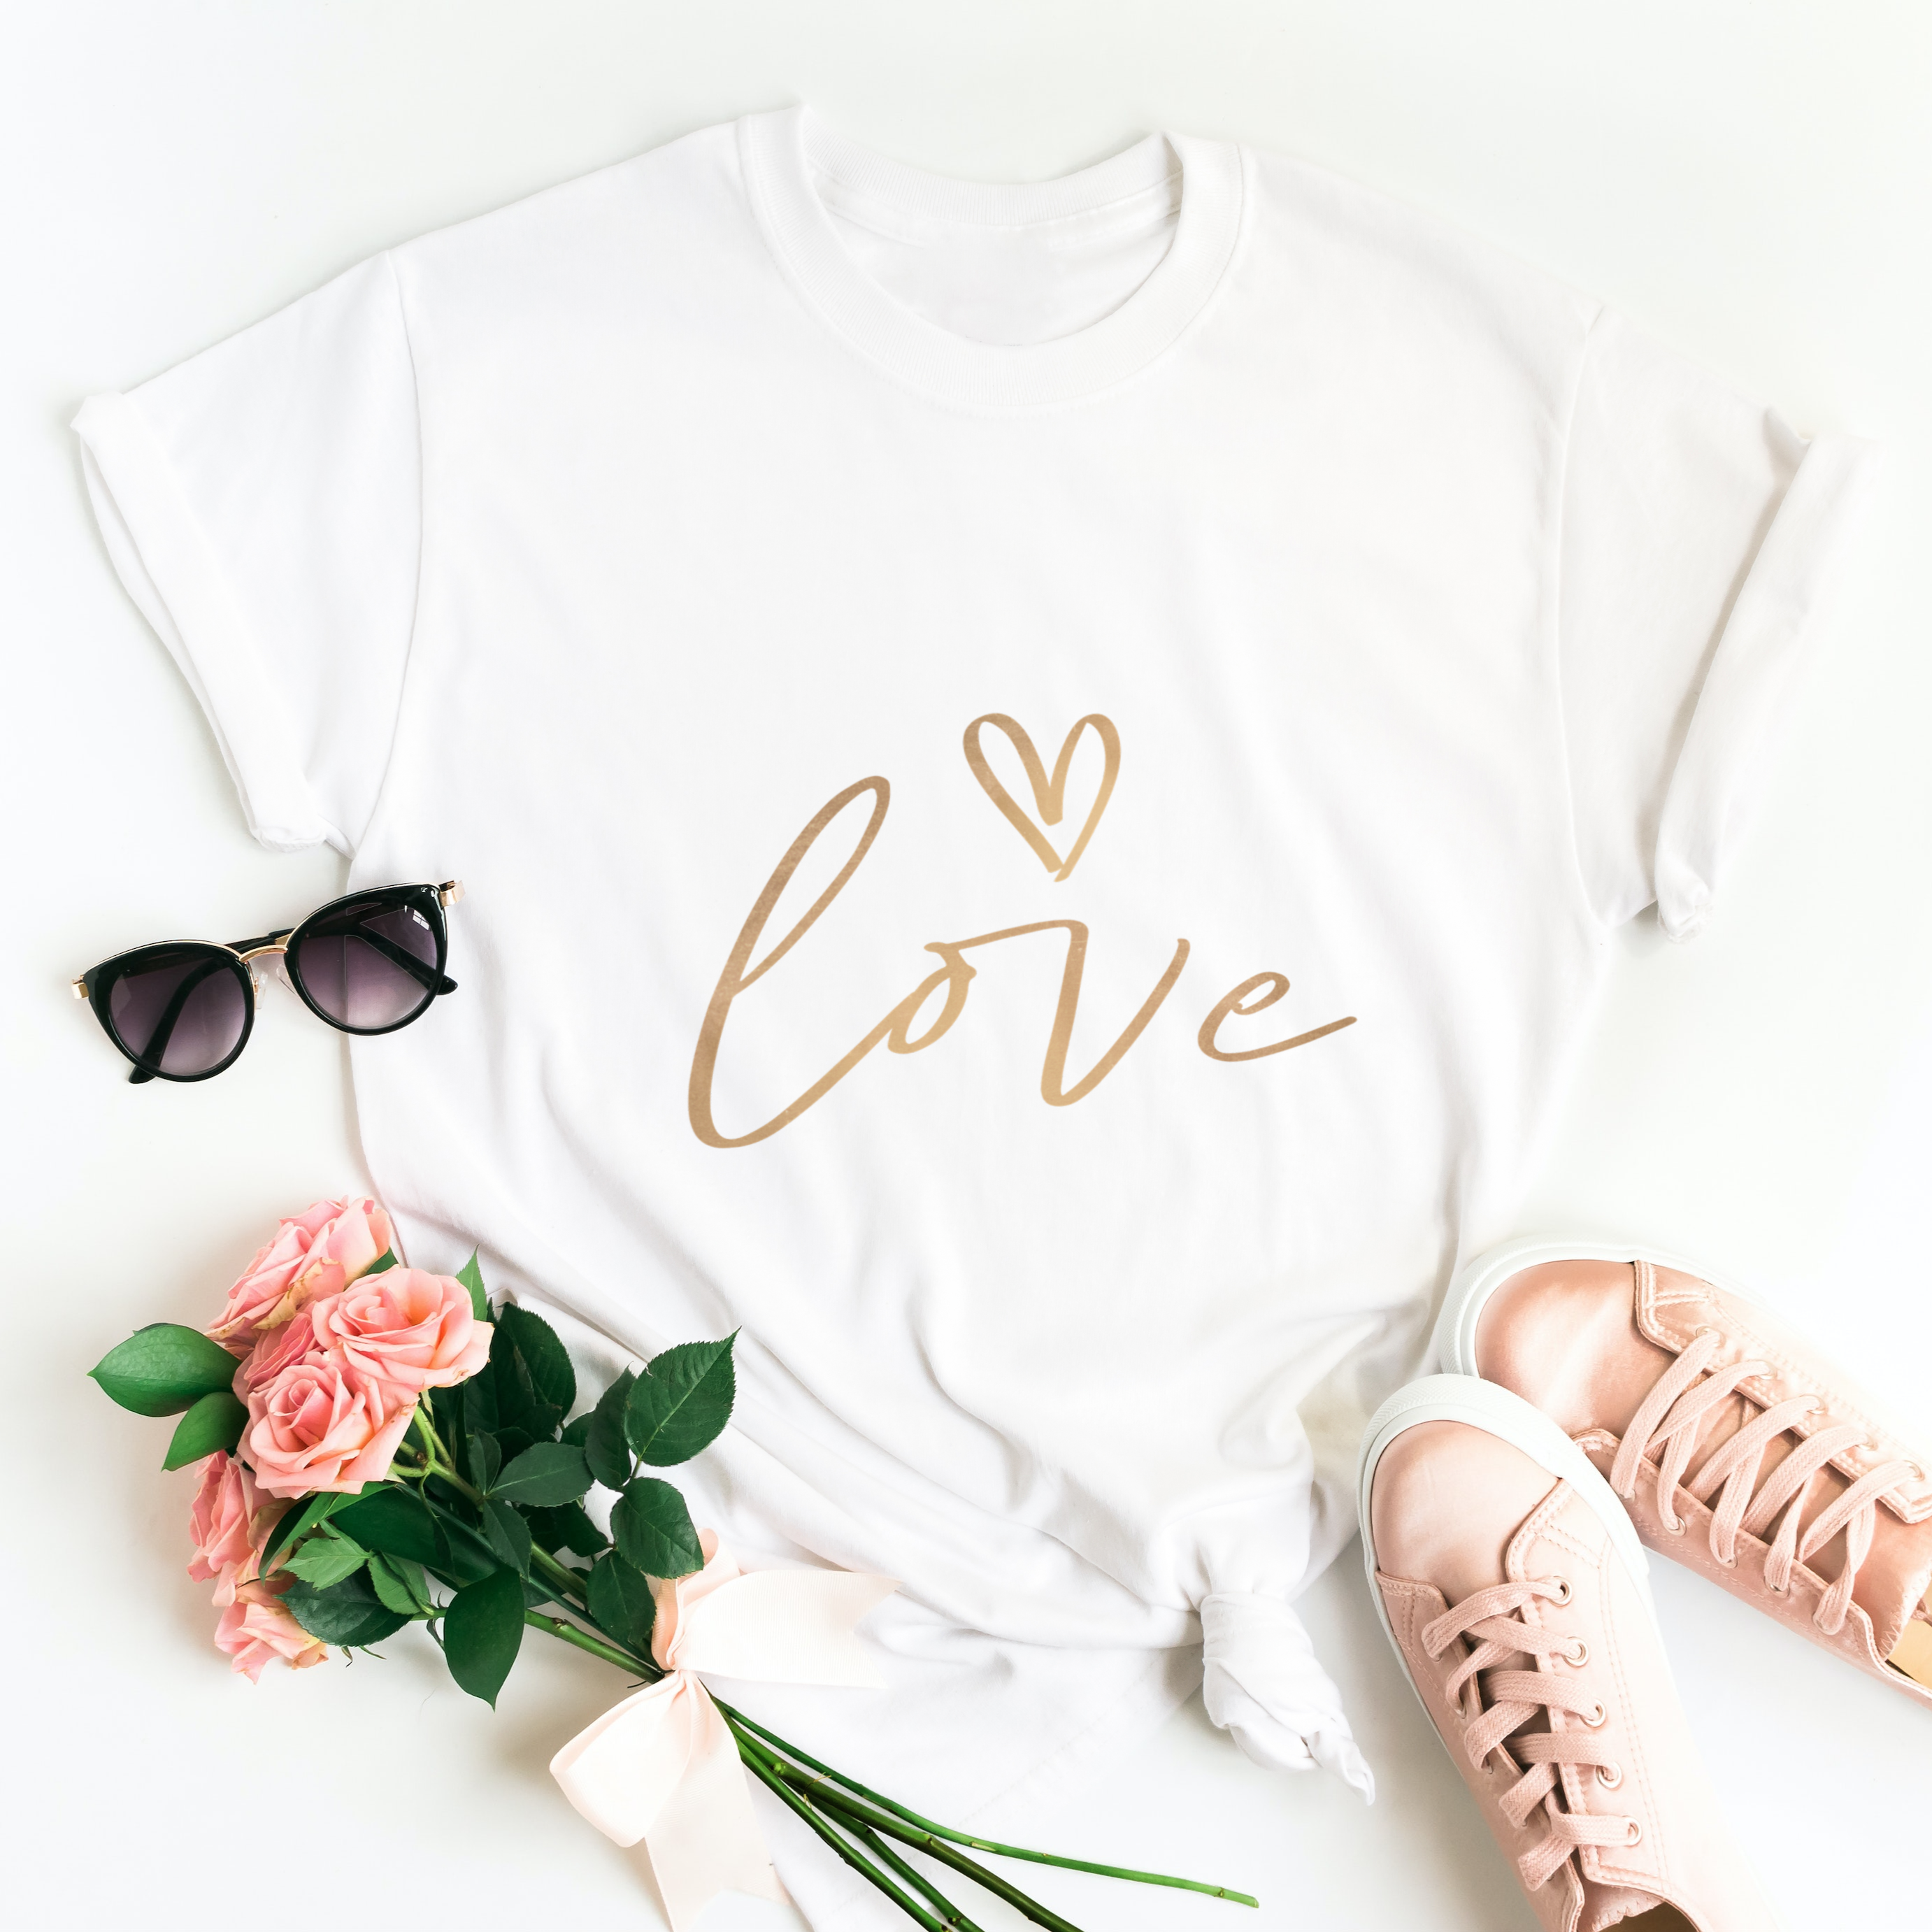 Story of Awakening Lifestyle Community Spirituality Relationships Love Light Meditation Oneness Earth Balance Healing Shop Store Charity Tree Nature Read Write T shirt Tops Tees Clothing Women Horoscope Organic Cotton Love Heart Valentines Day Quote